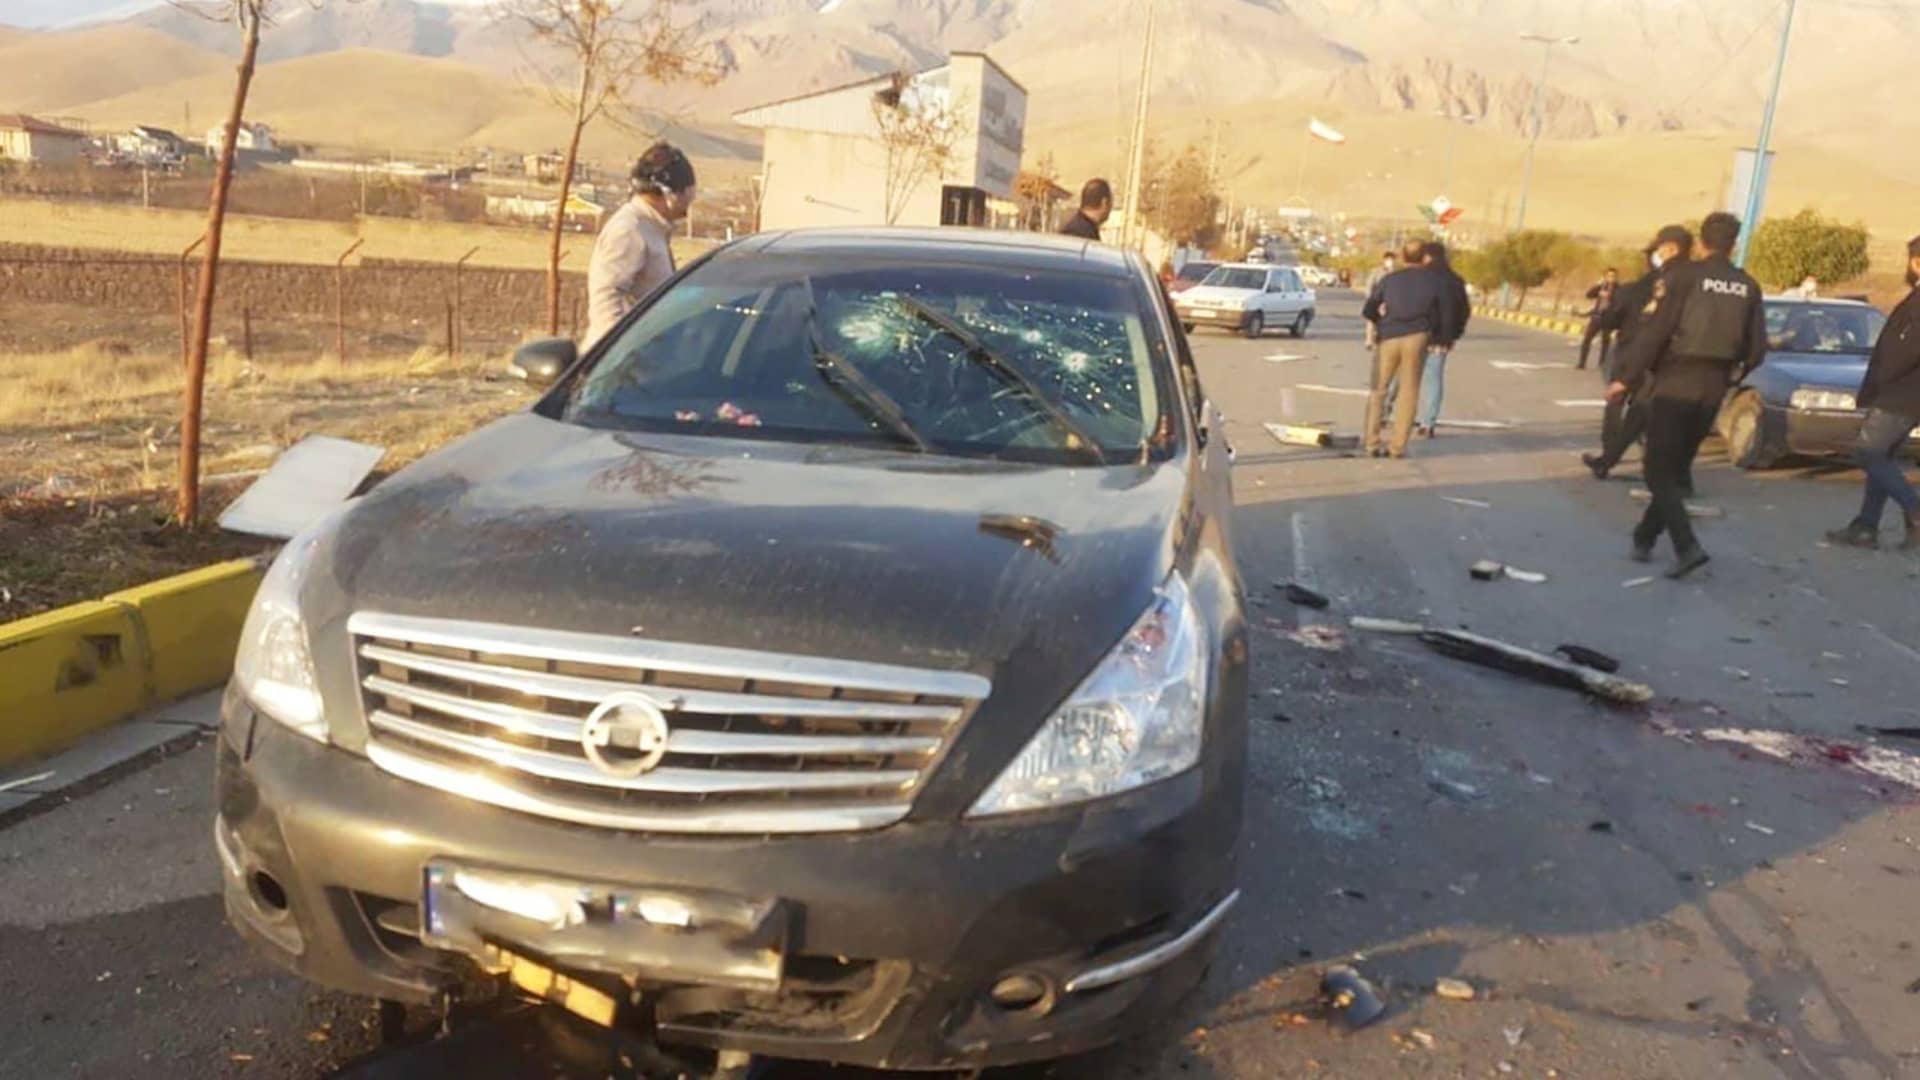 A view shows the scene of the attack that killed Prominent Iranian scientist Mohsen Fakhrizadeh, outside Tehran, Iran, November 27, 2020.